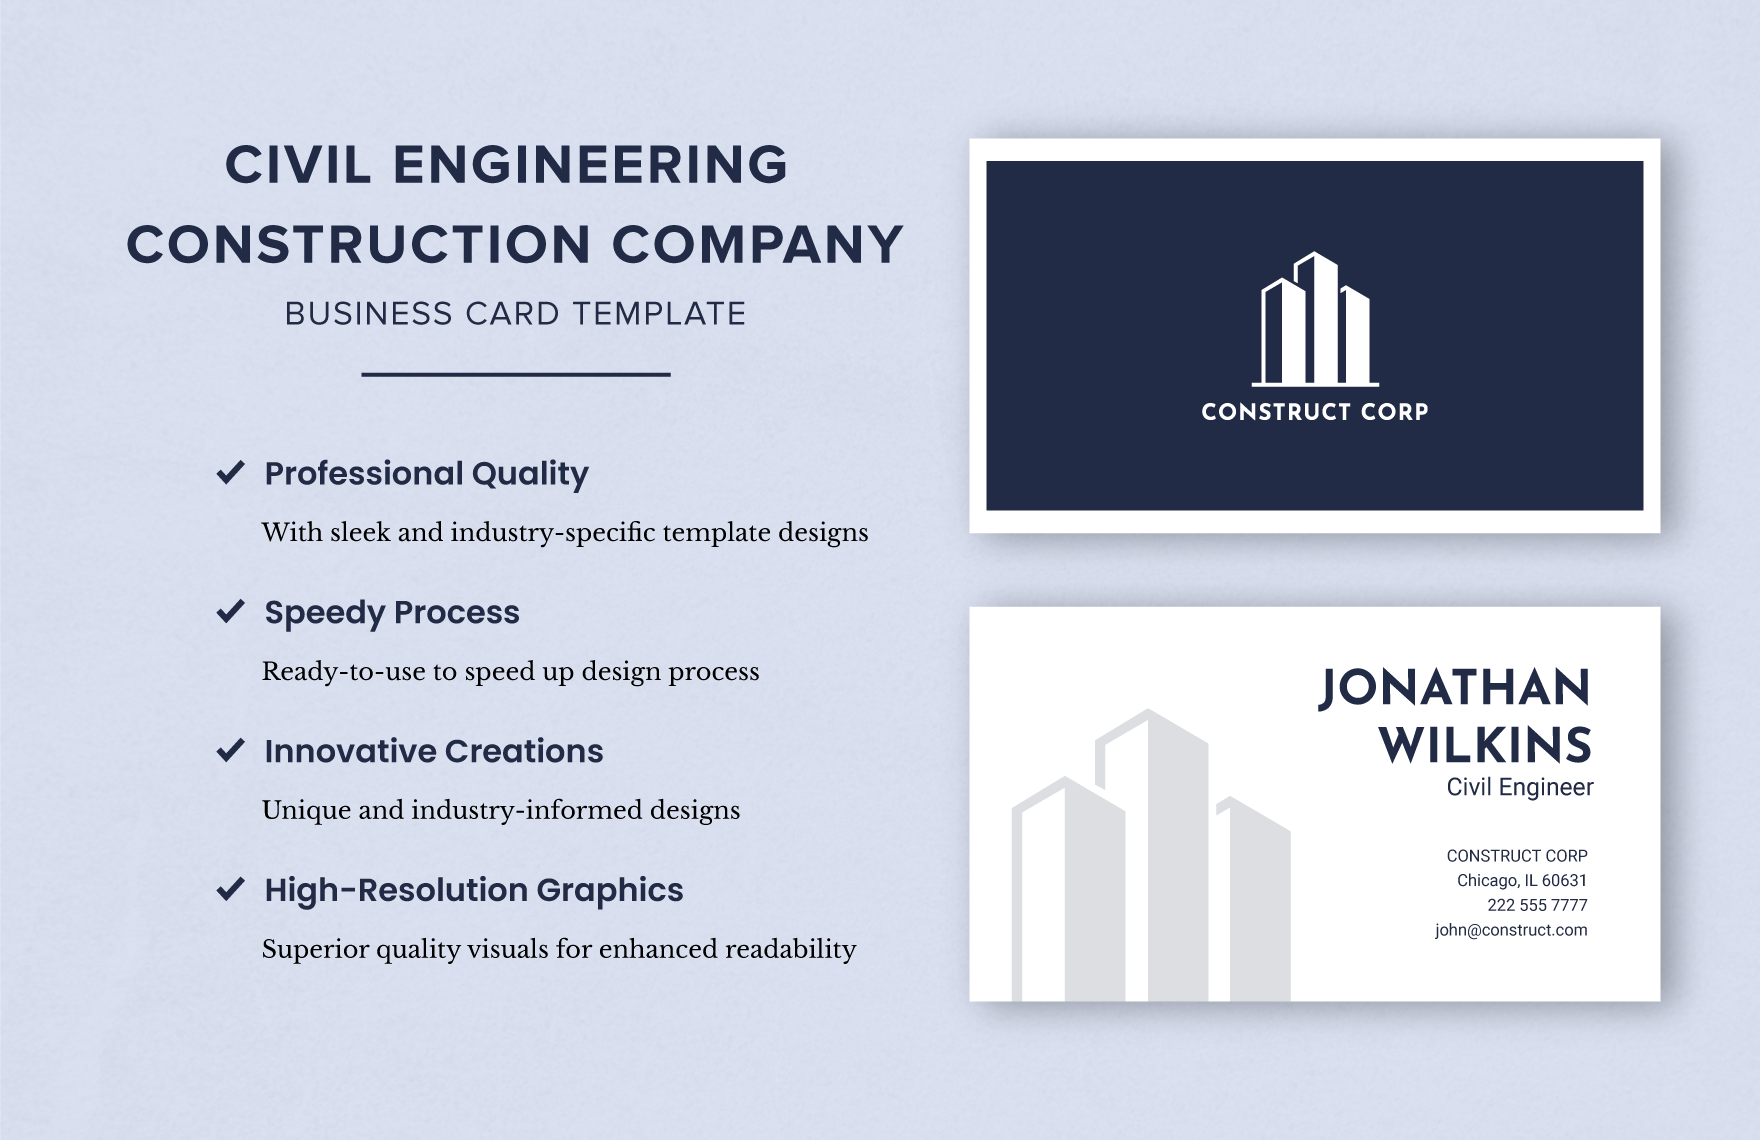 Civil Engineering Construction Company Business Card Template